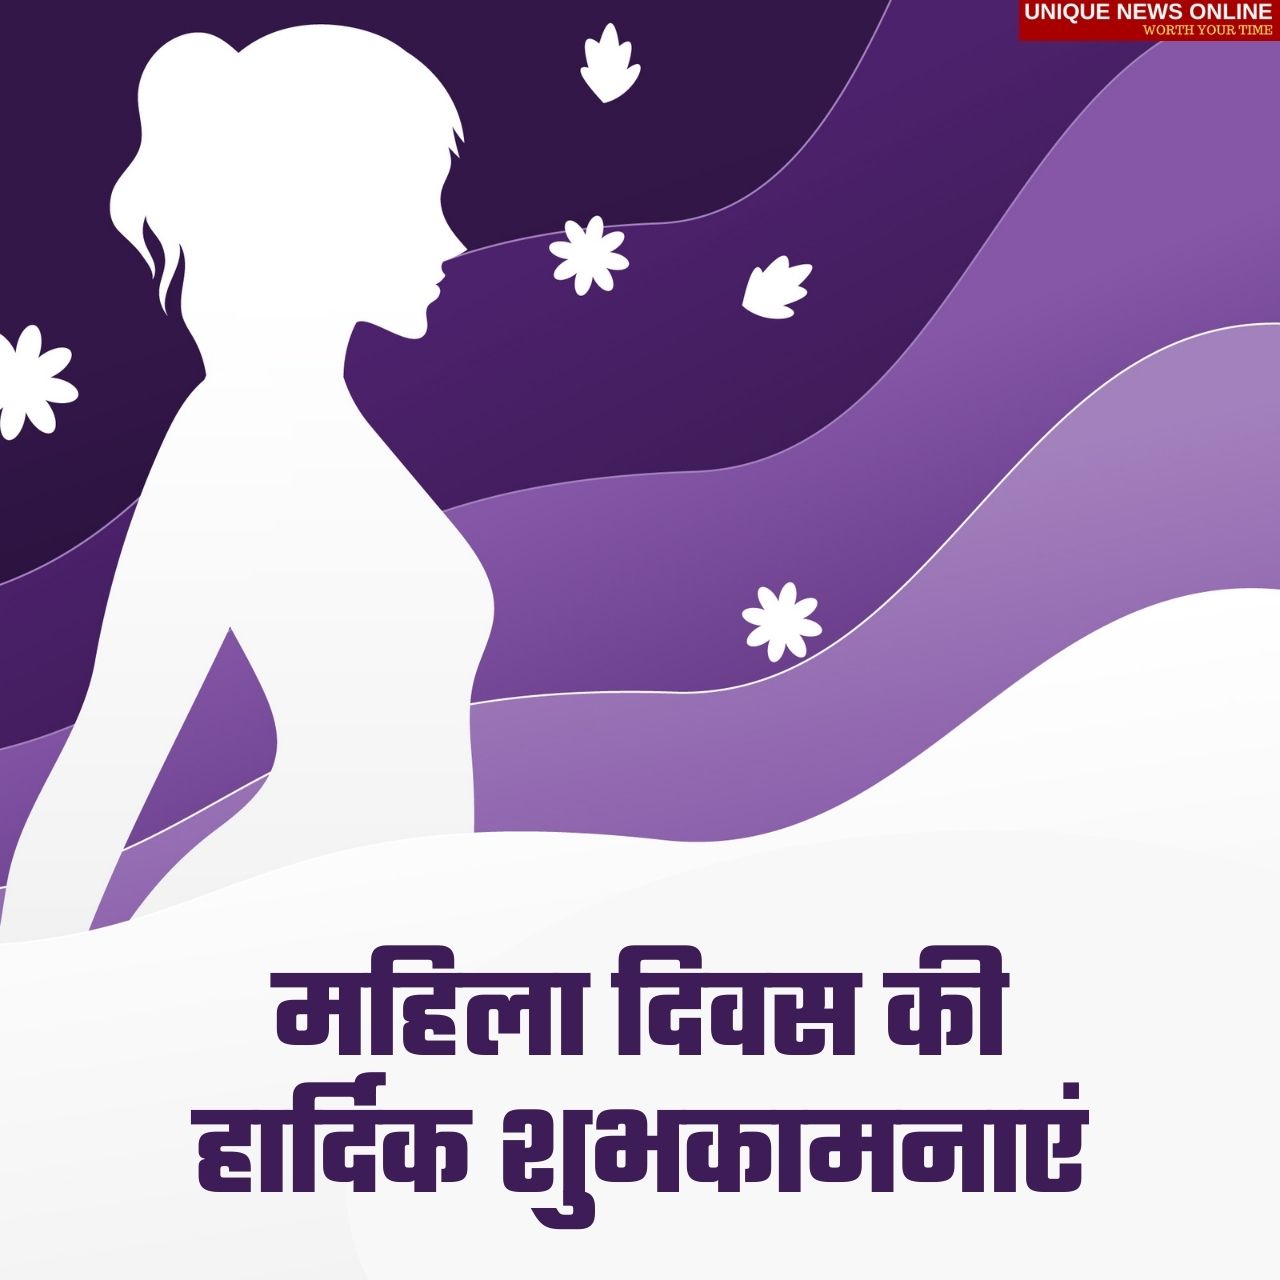 Happy Women's Day 2022 Hindi Wishes, Greetings, Shayari, Messages, Quotes, to Share